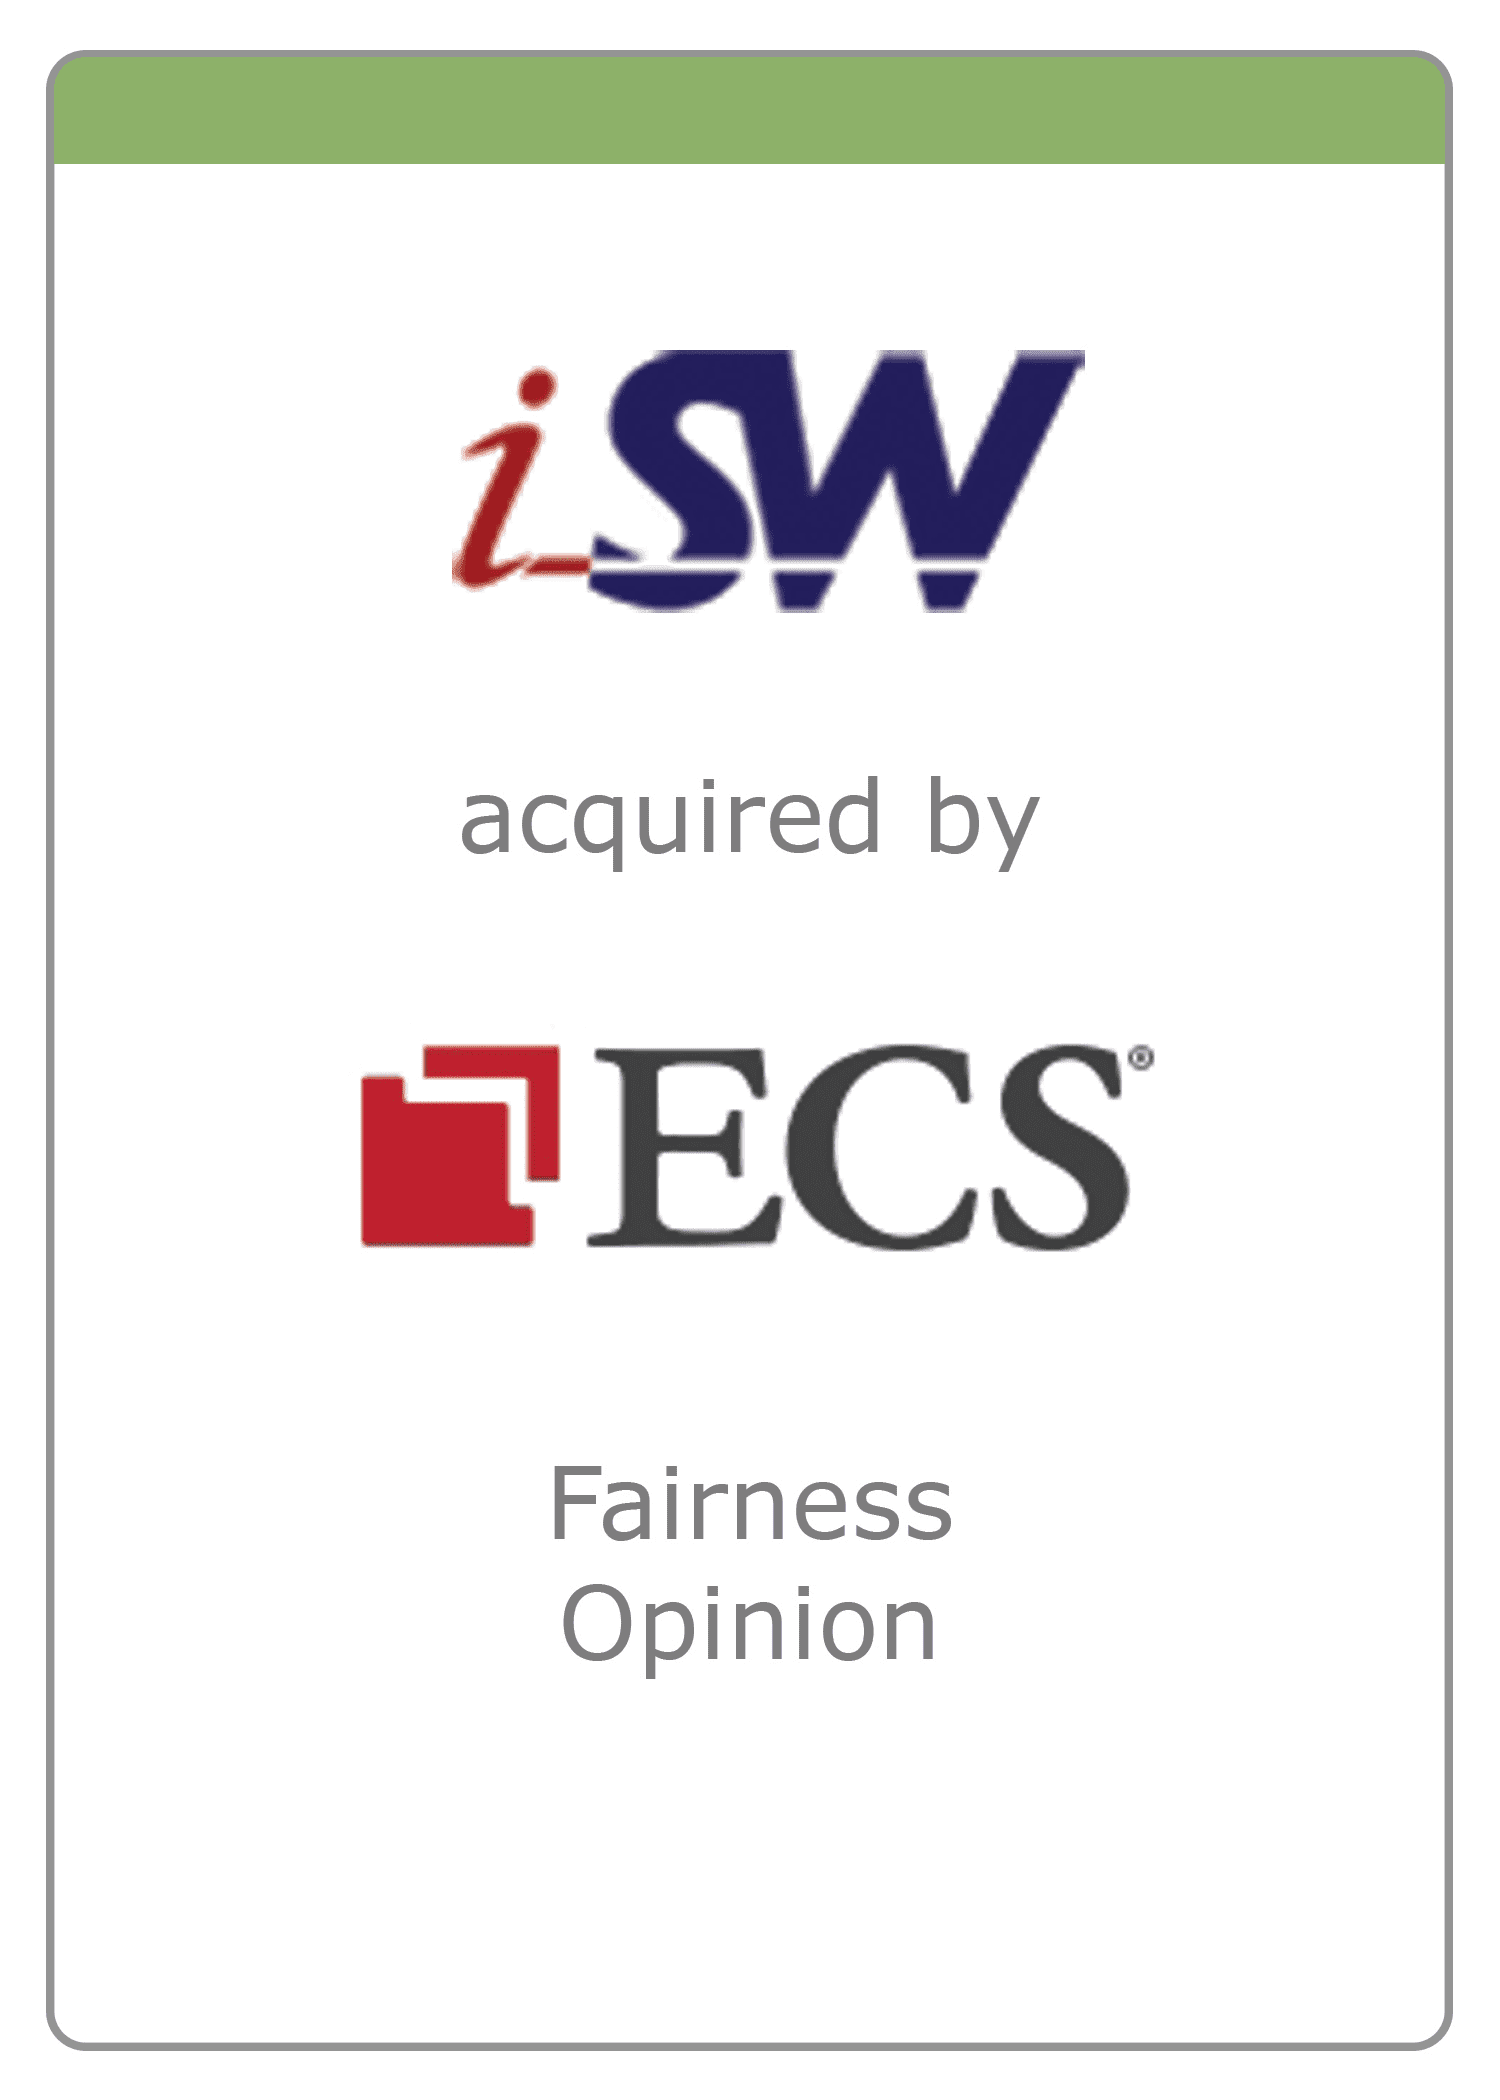 iSW - ECS - - Transaction Opinions - The McLean Group